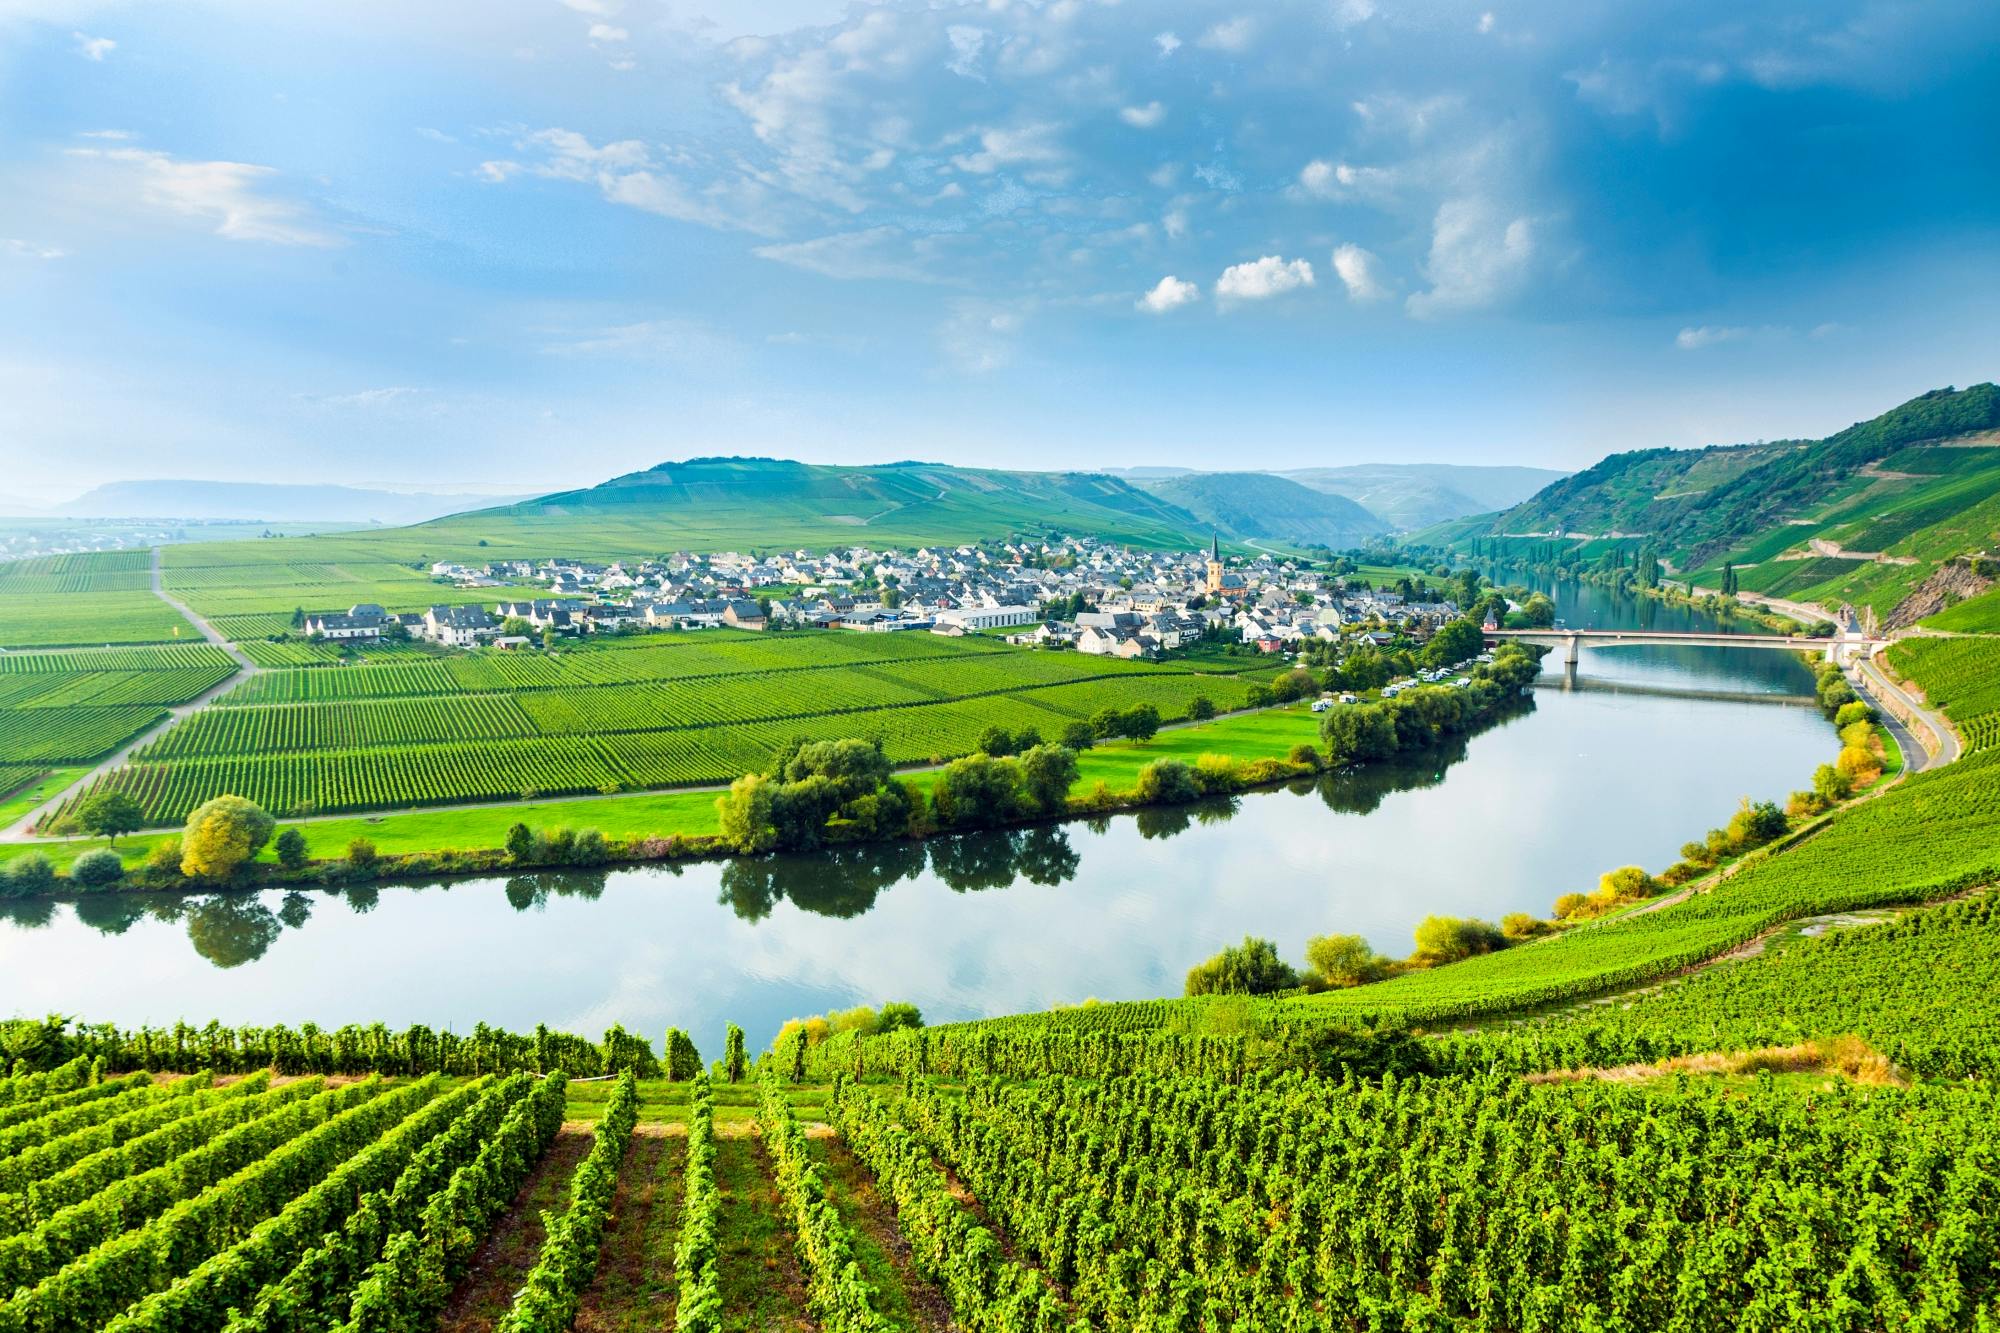 Luxembourg Moselle day trip with wine tasting and boat tour